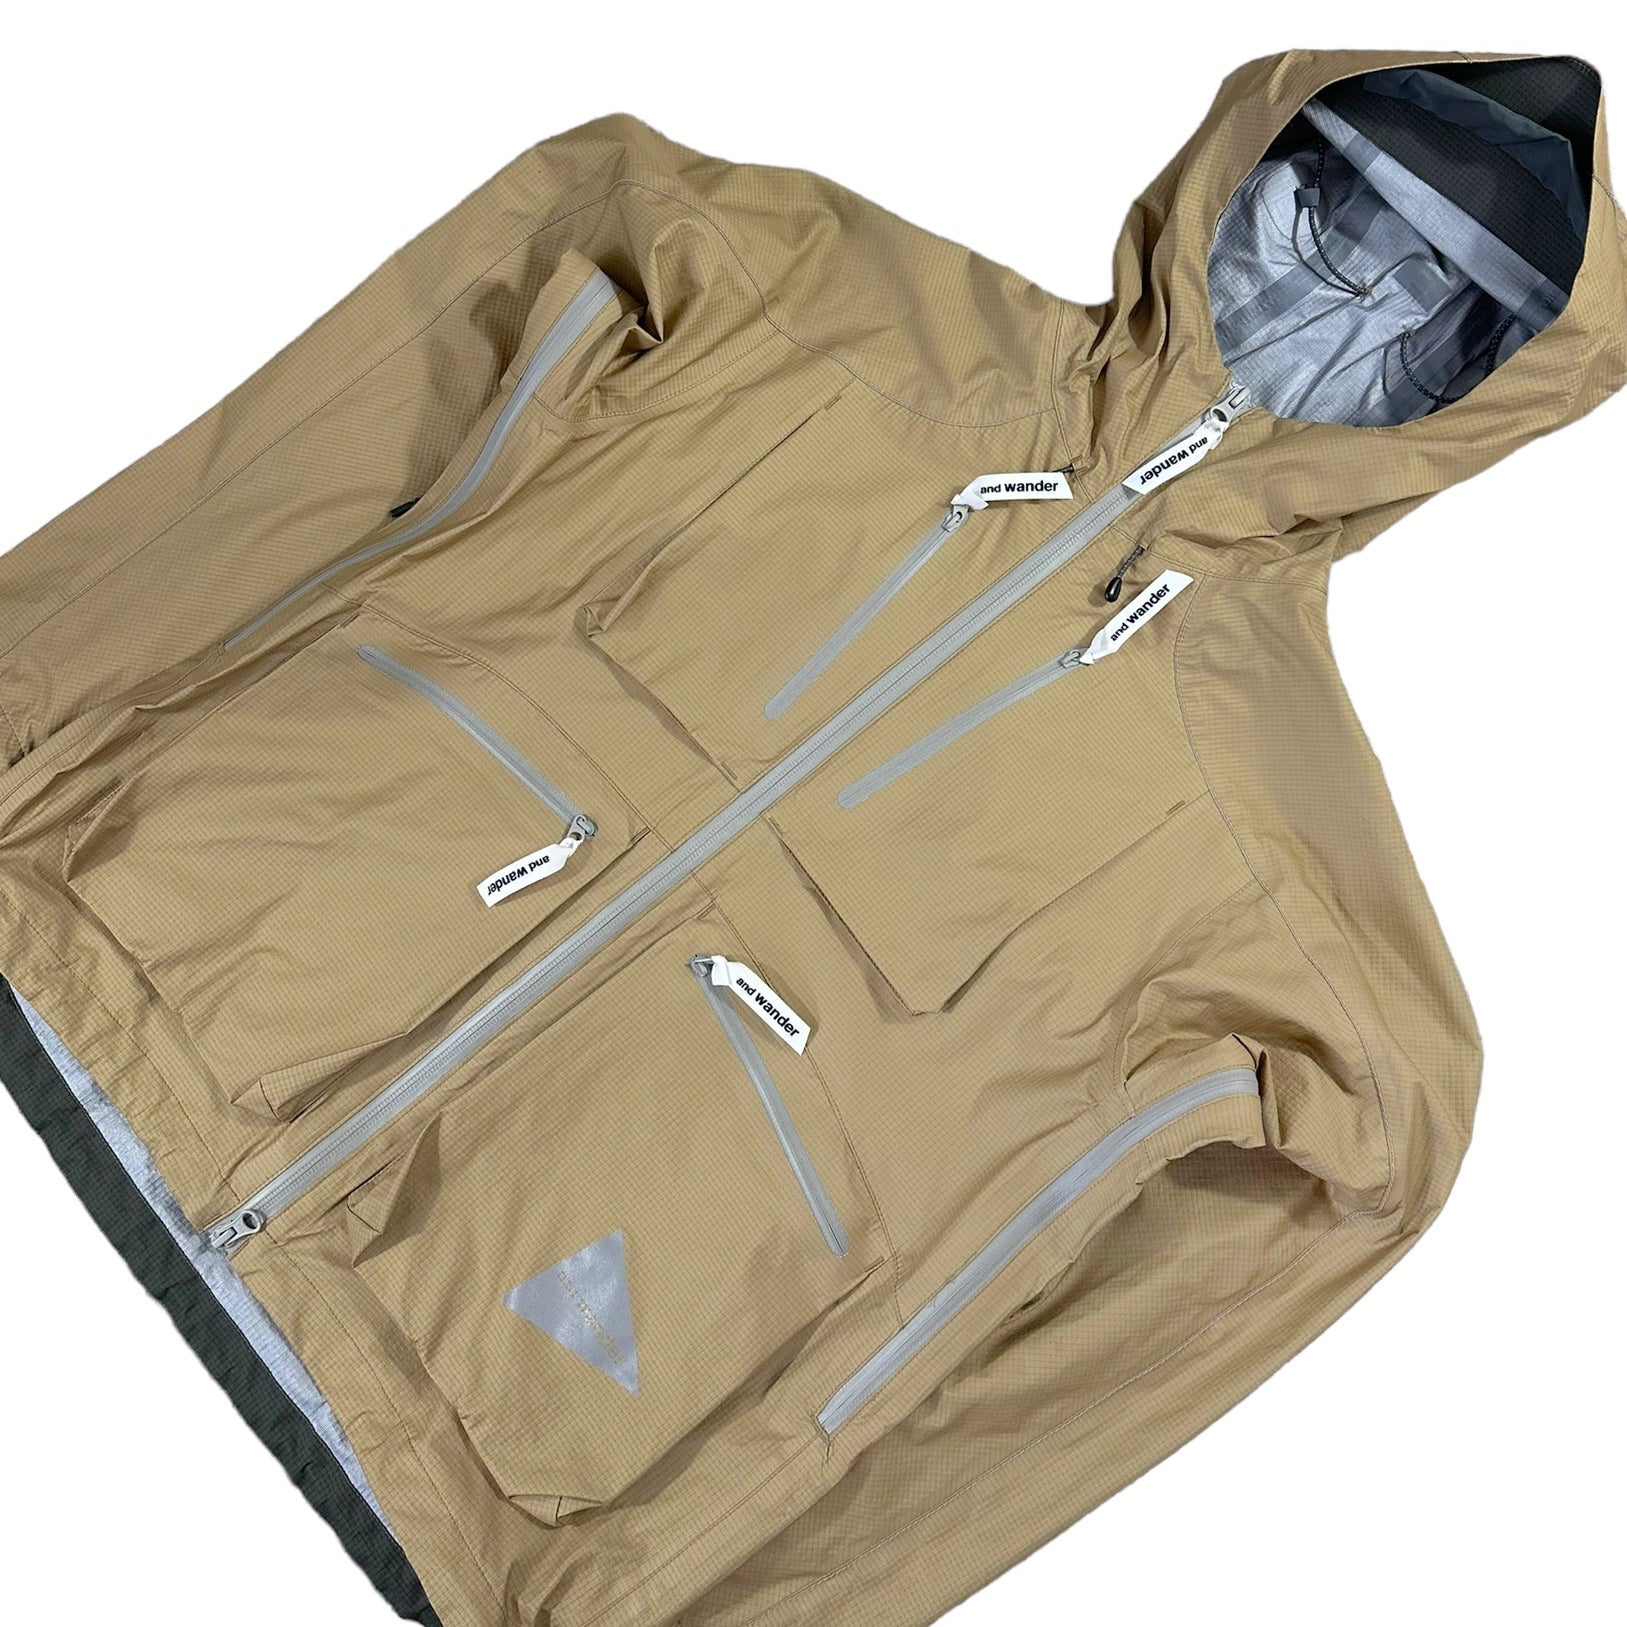 And Wander Event Pertex MultiPocket Jacket with dropping pockets